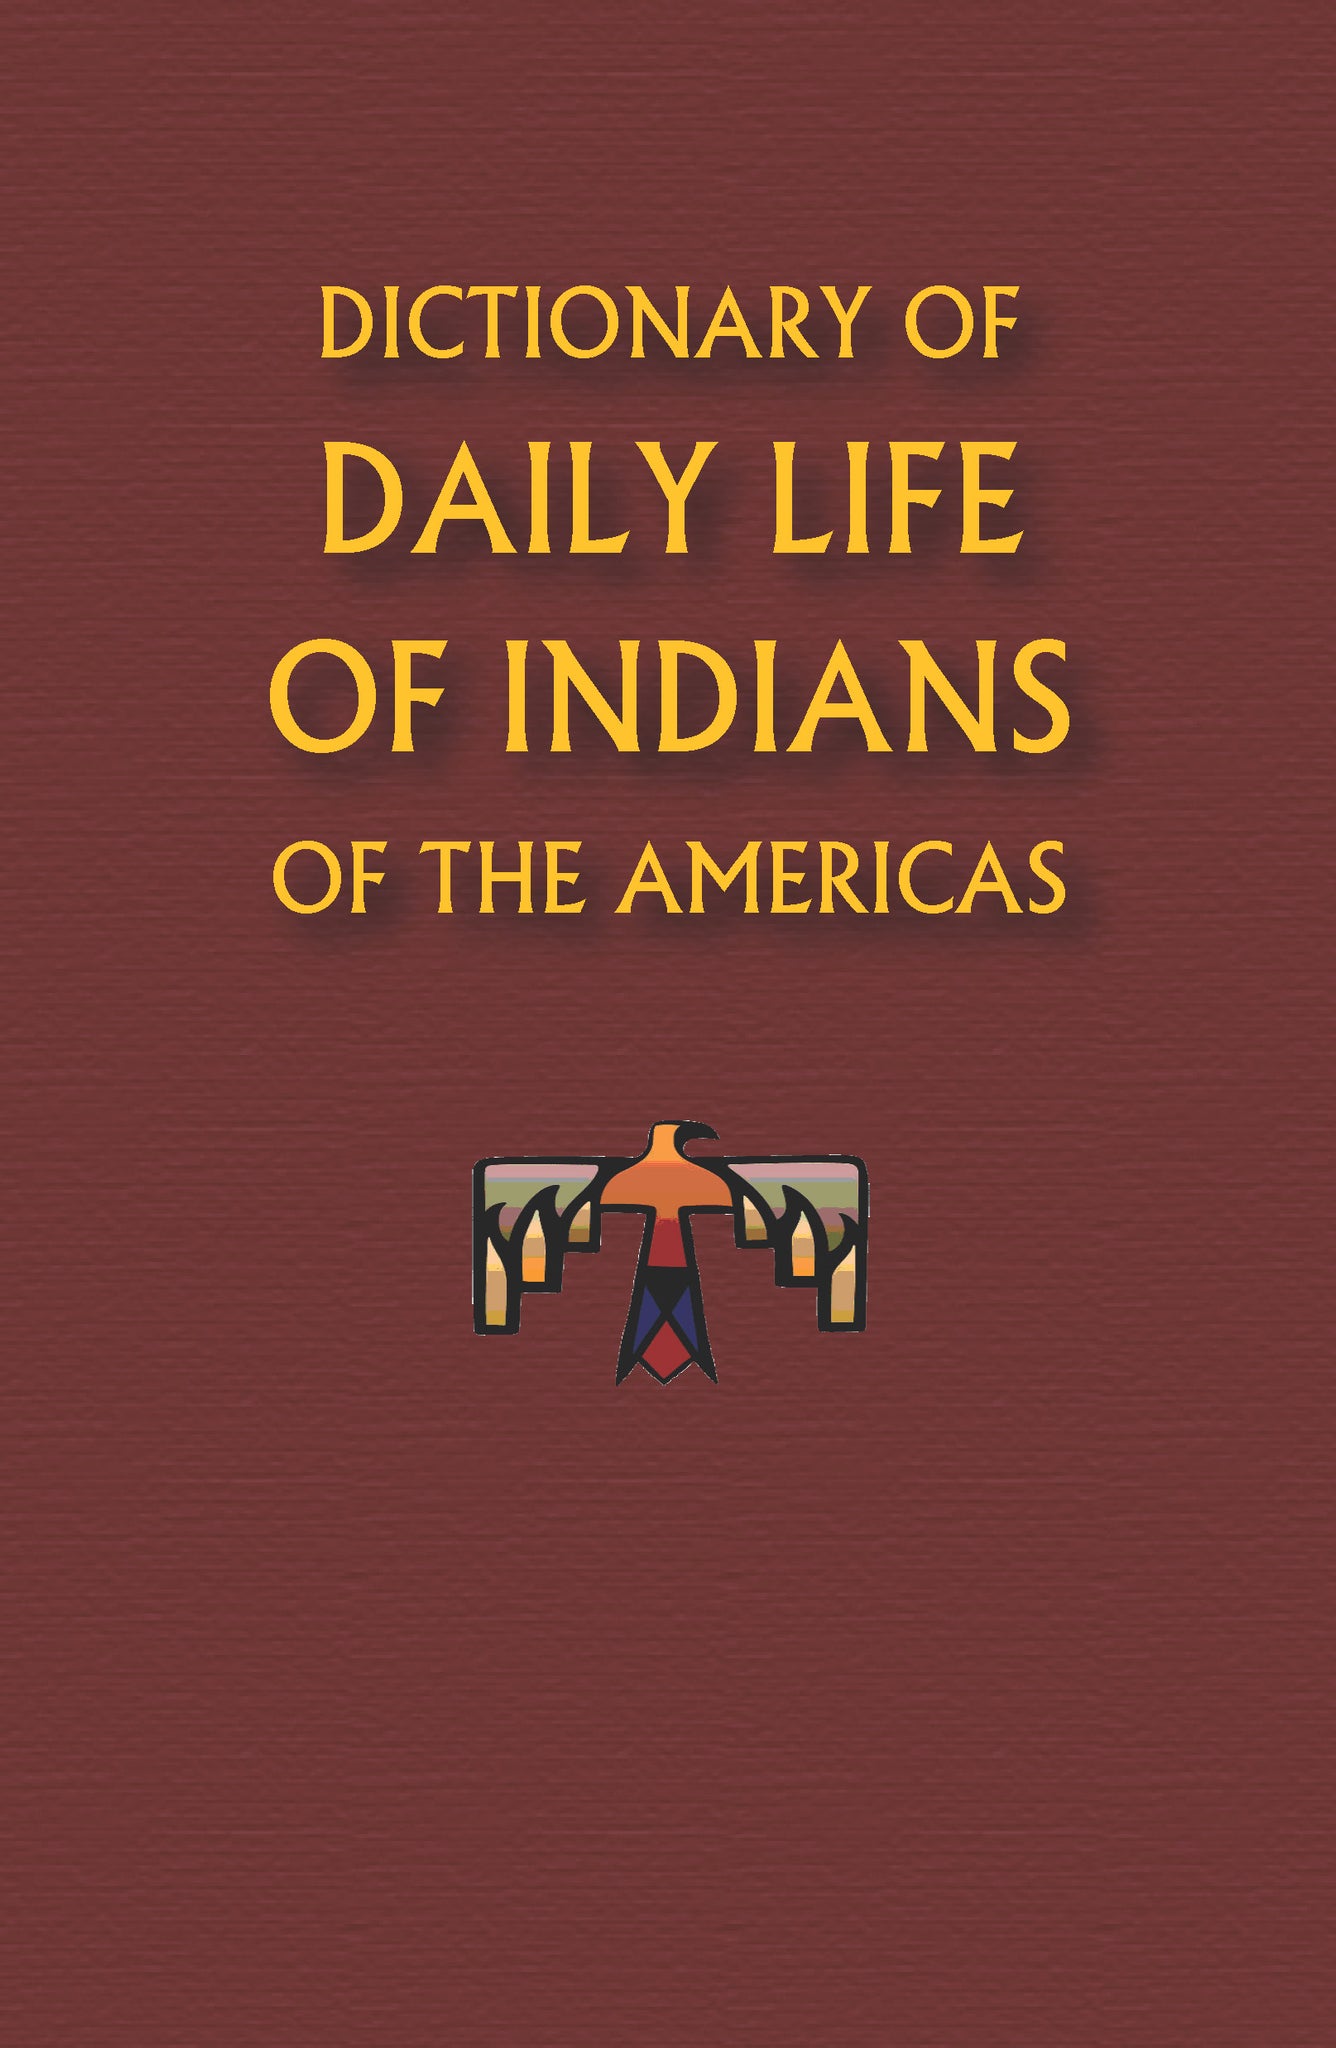 Dictionary of Daily Life of Indians of the Americas